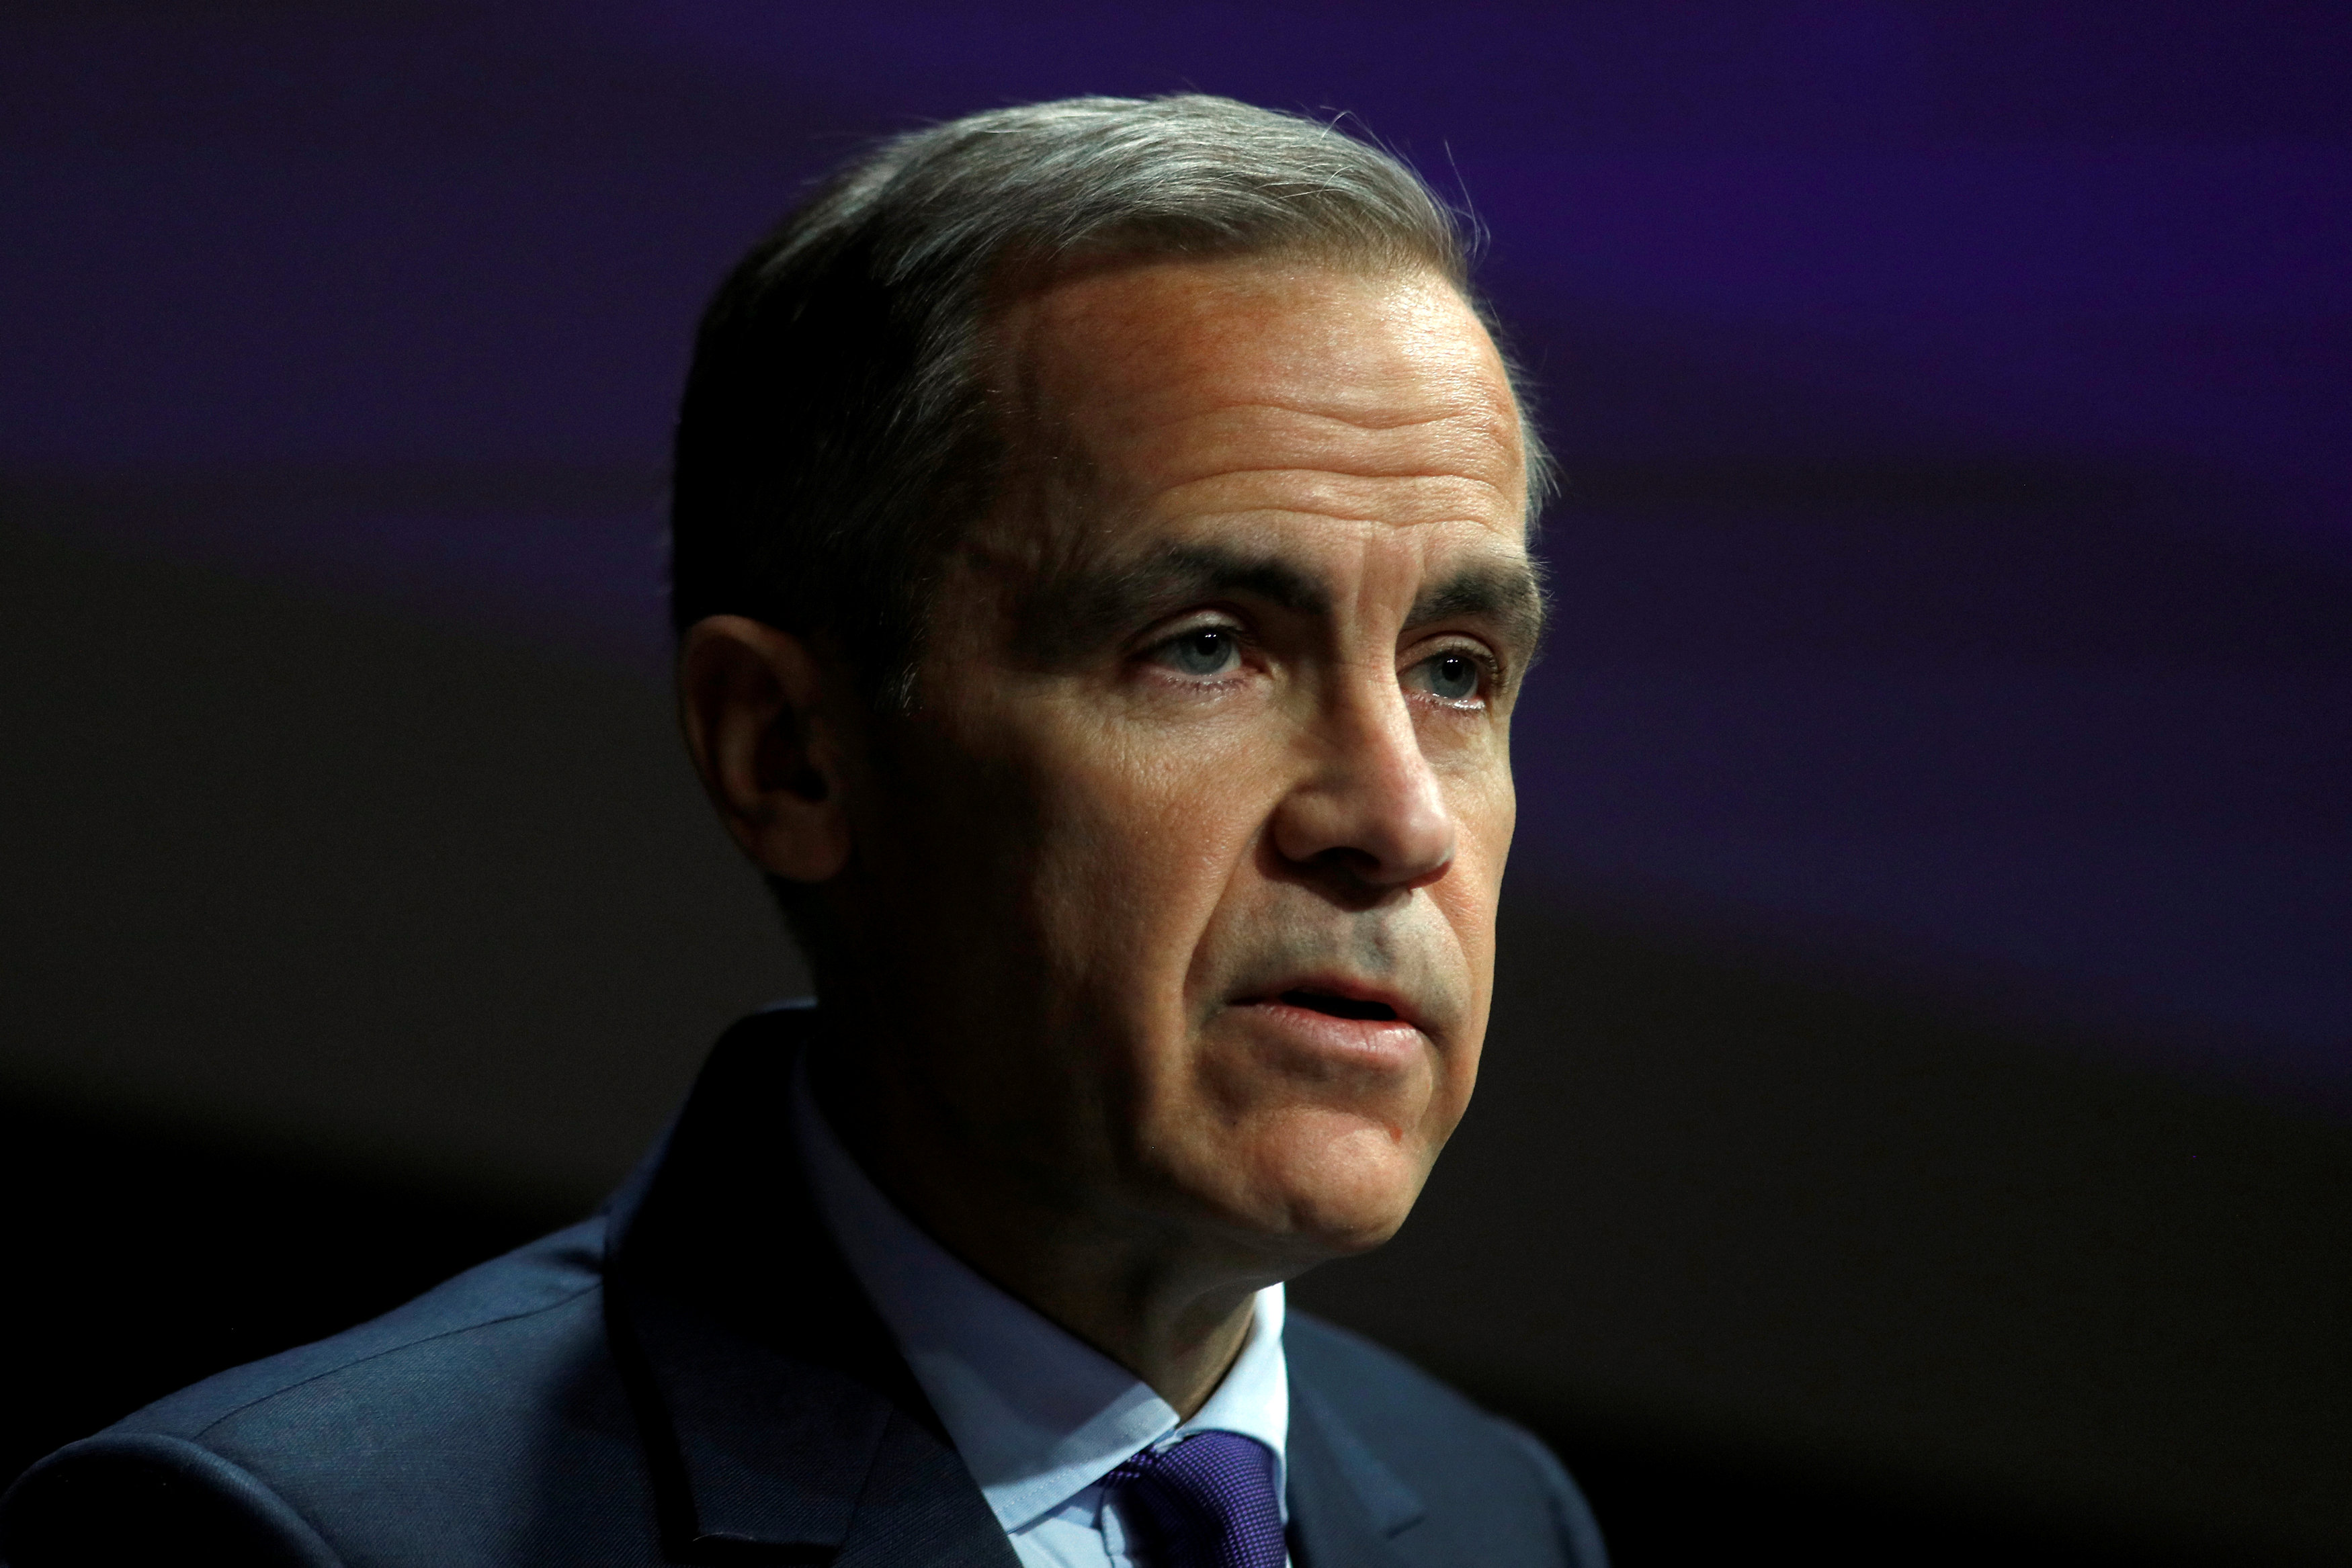 China is 'one of the bigger risks' to global economy: Carney